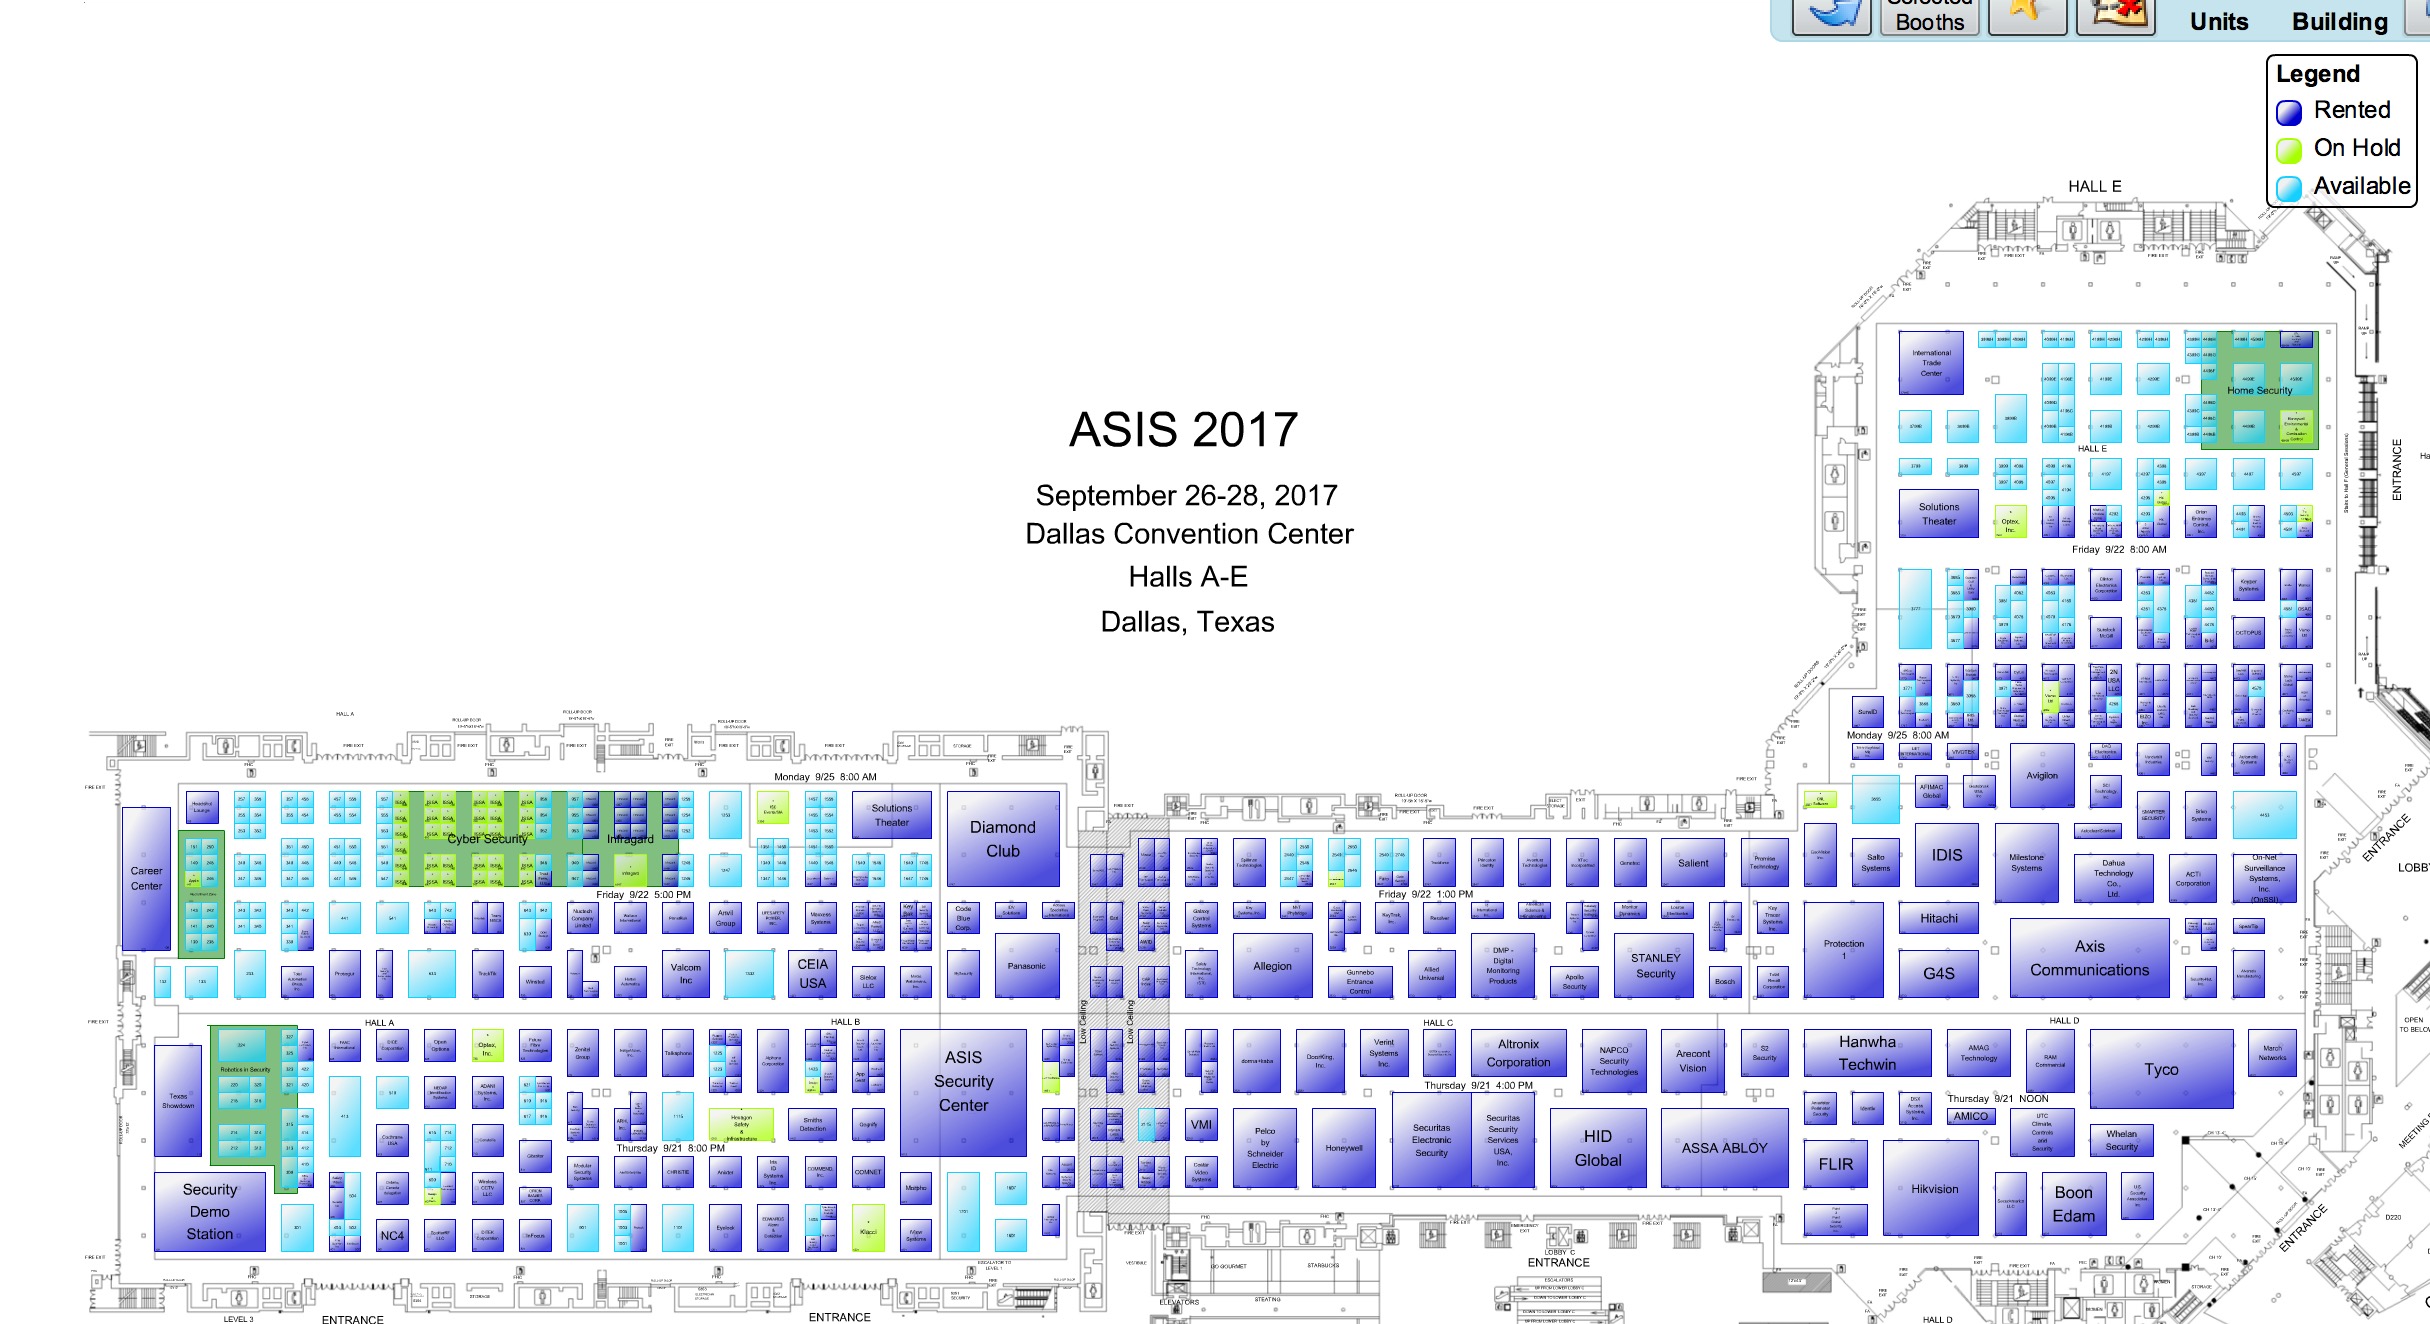 ASIS 2017 Floorplan Is Out Two Interesting Thing